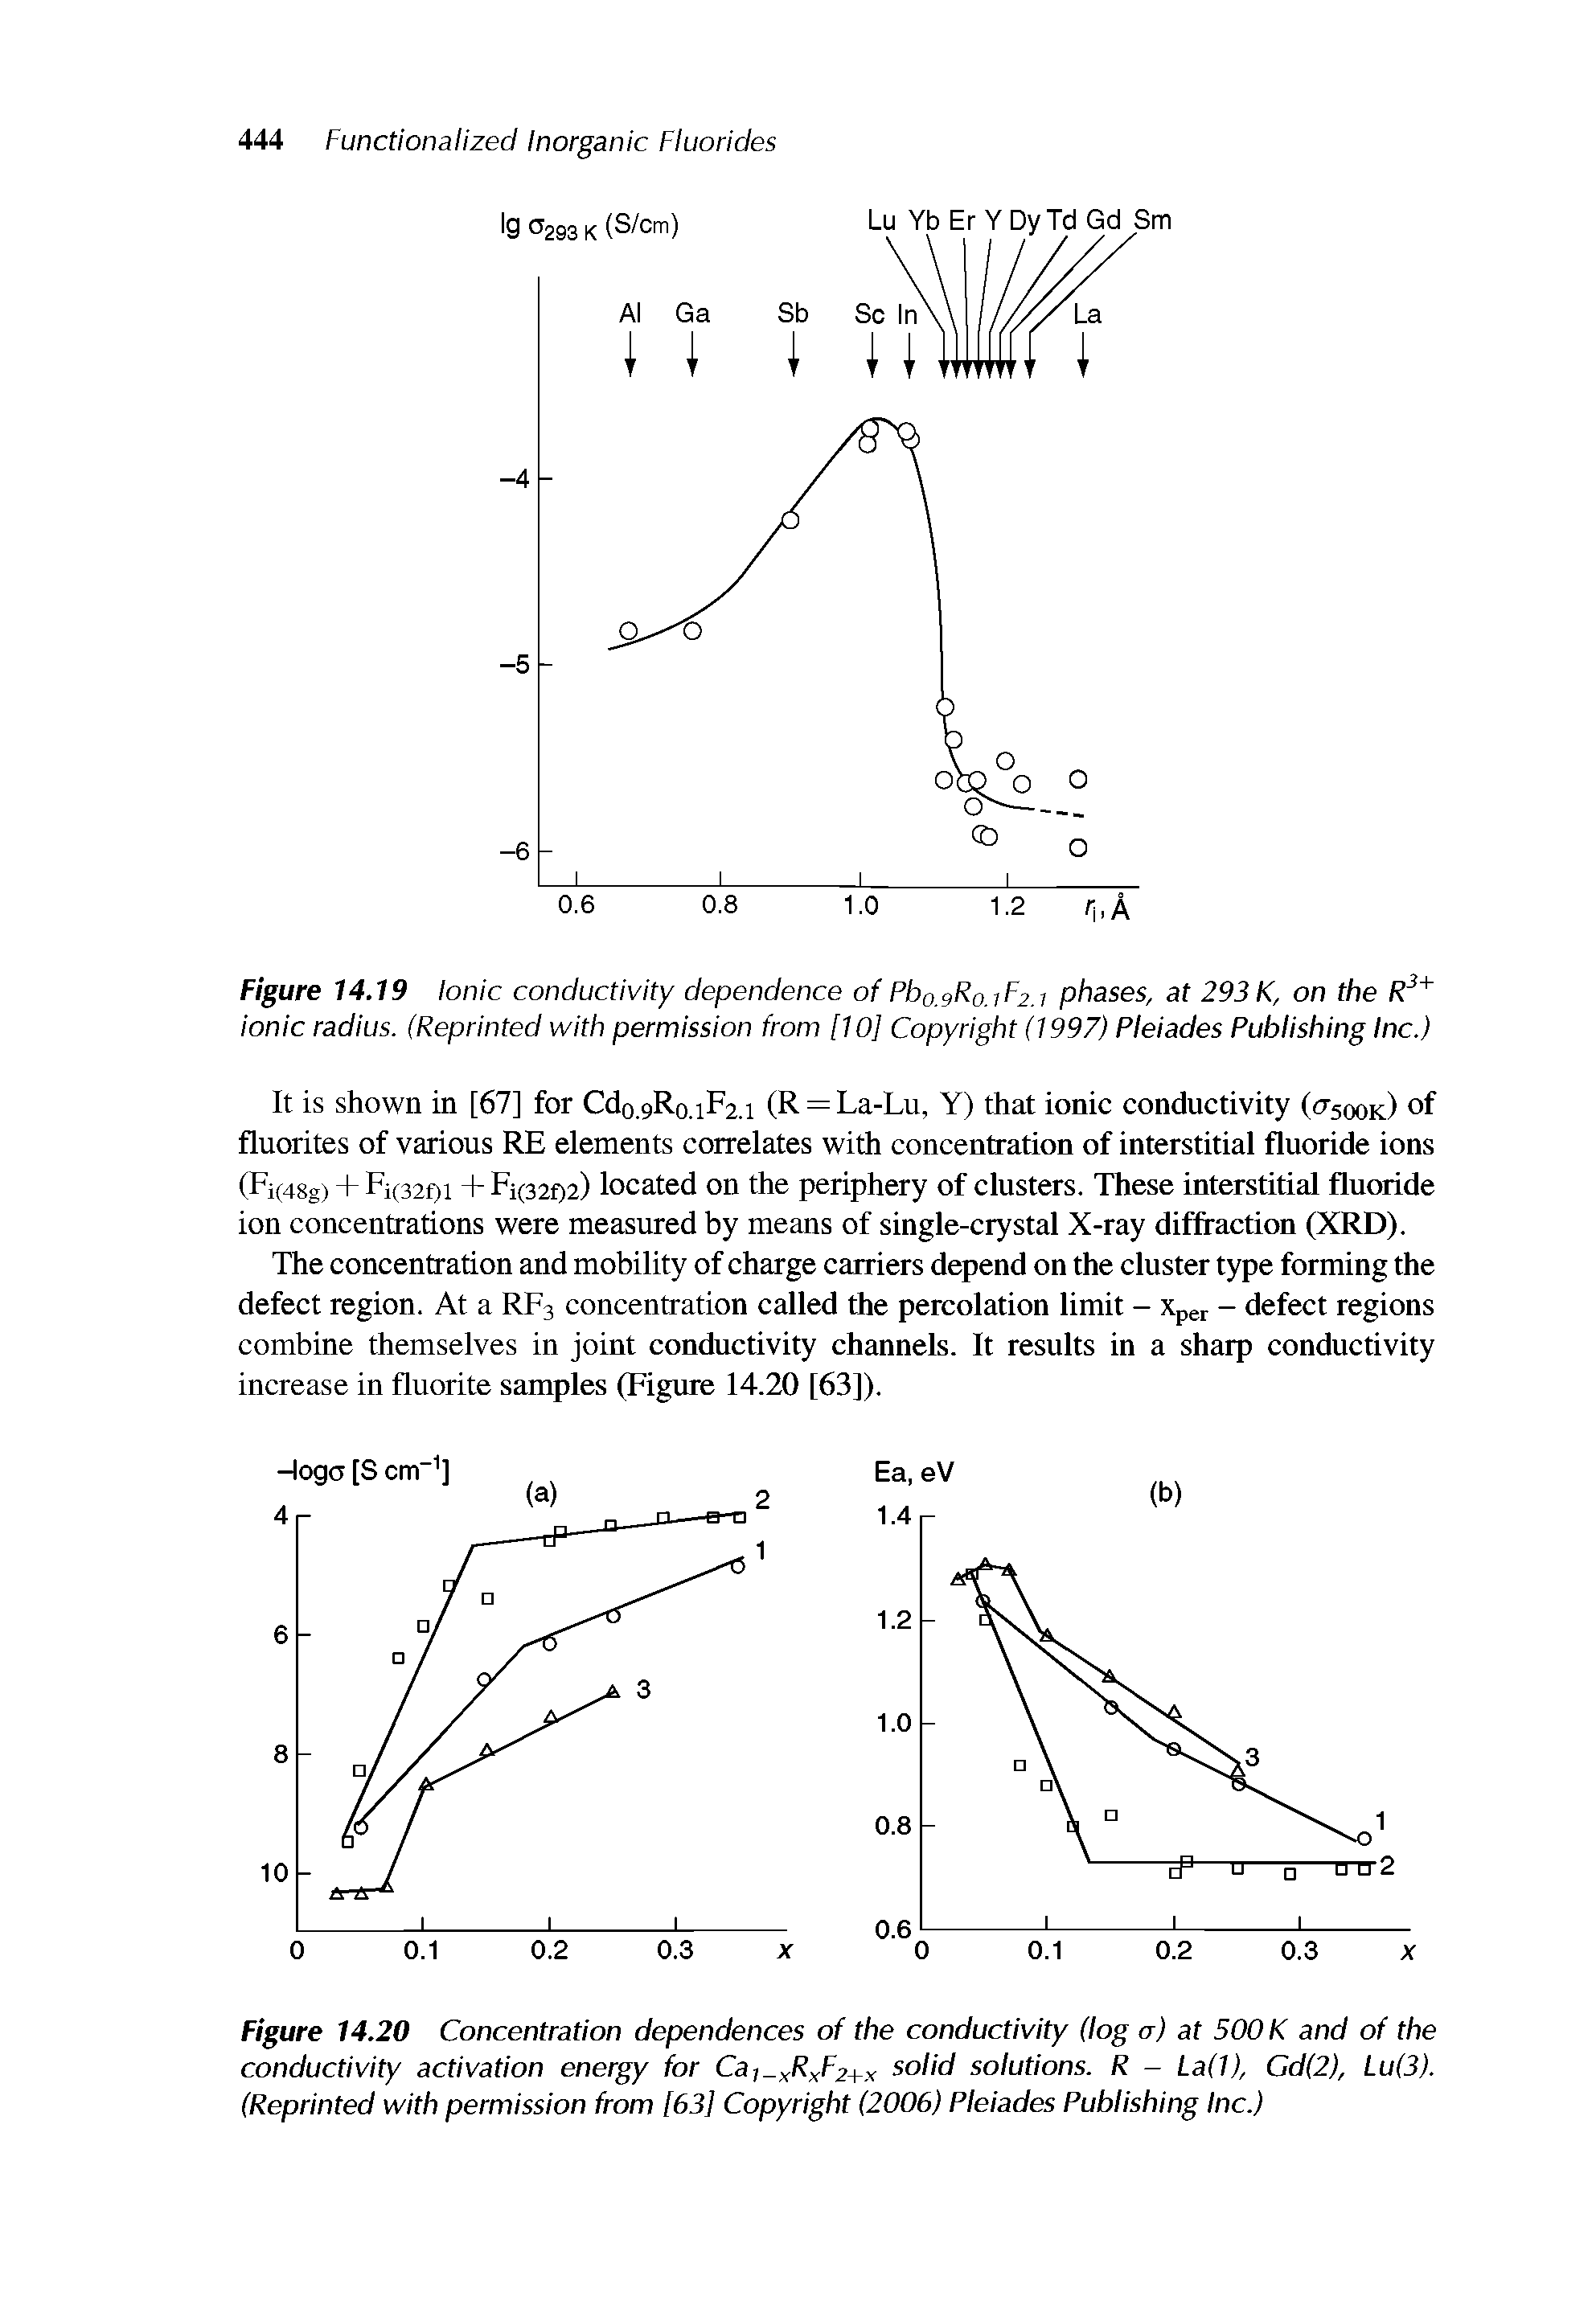 Figure 14.20 Concentration dependences of the conductivity (log a) at BOOK and of the conductivity activation energy for Cai RxFz+x solid solutions. R - La(1), Gd(2), Lu(3). (Reprinted with permission from [63] Copyright (2006) Pleiades Publishing Inc.)...